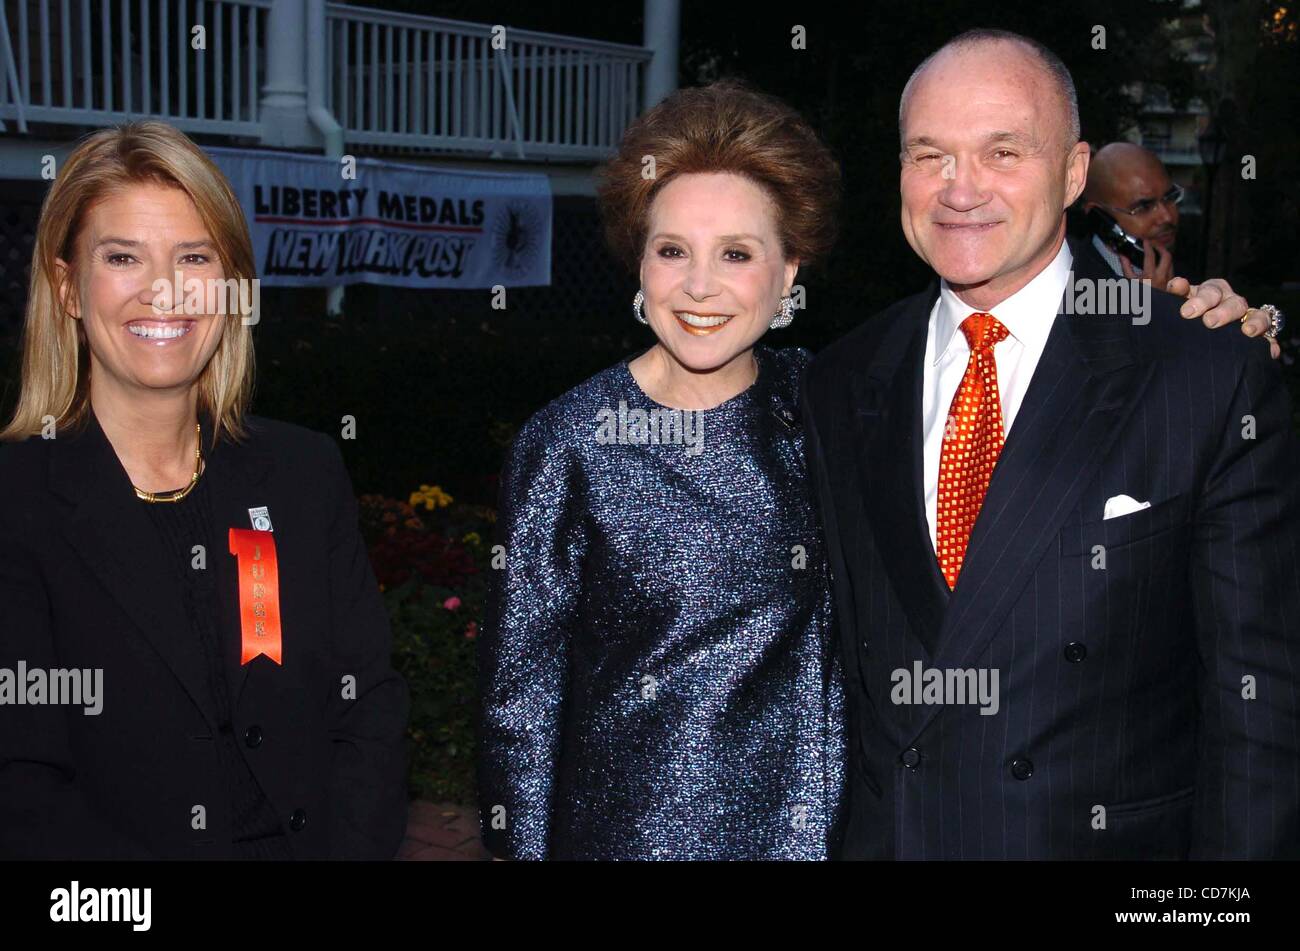 Oct. 7, 2004 - New York, New York, U.S. - K39838JKRON.THE NEW YORK POST ANNOUNCES WINNERS OF THE 3RD ANNUAL LIBERTY MEDALS HONORING NEW YORK'S EVERYDAY HEROES GRACIE MANSION.NEW YORK New York 10/07/2004.  /   2004..GRETA VAN SUSTEREN, CINDY ADAMS, POLICE COMMISSIONER RAYMOND KELLY(Credit Image: Â© J Stock Photo